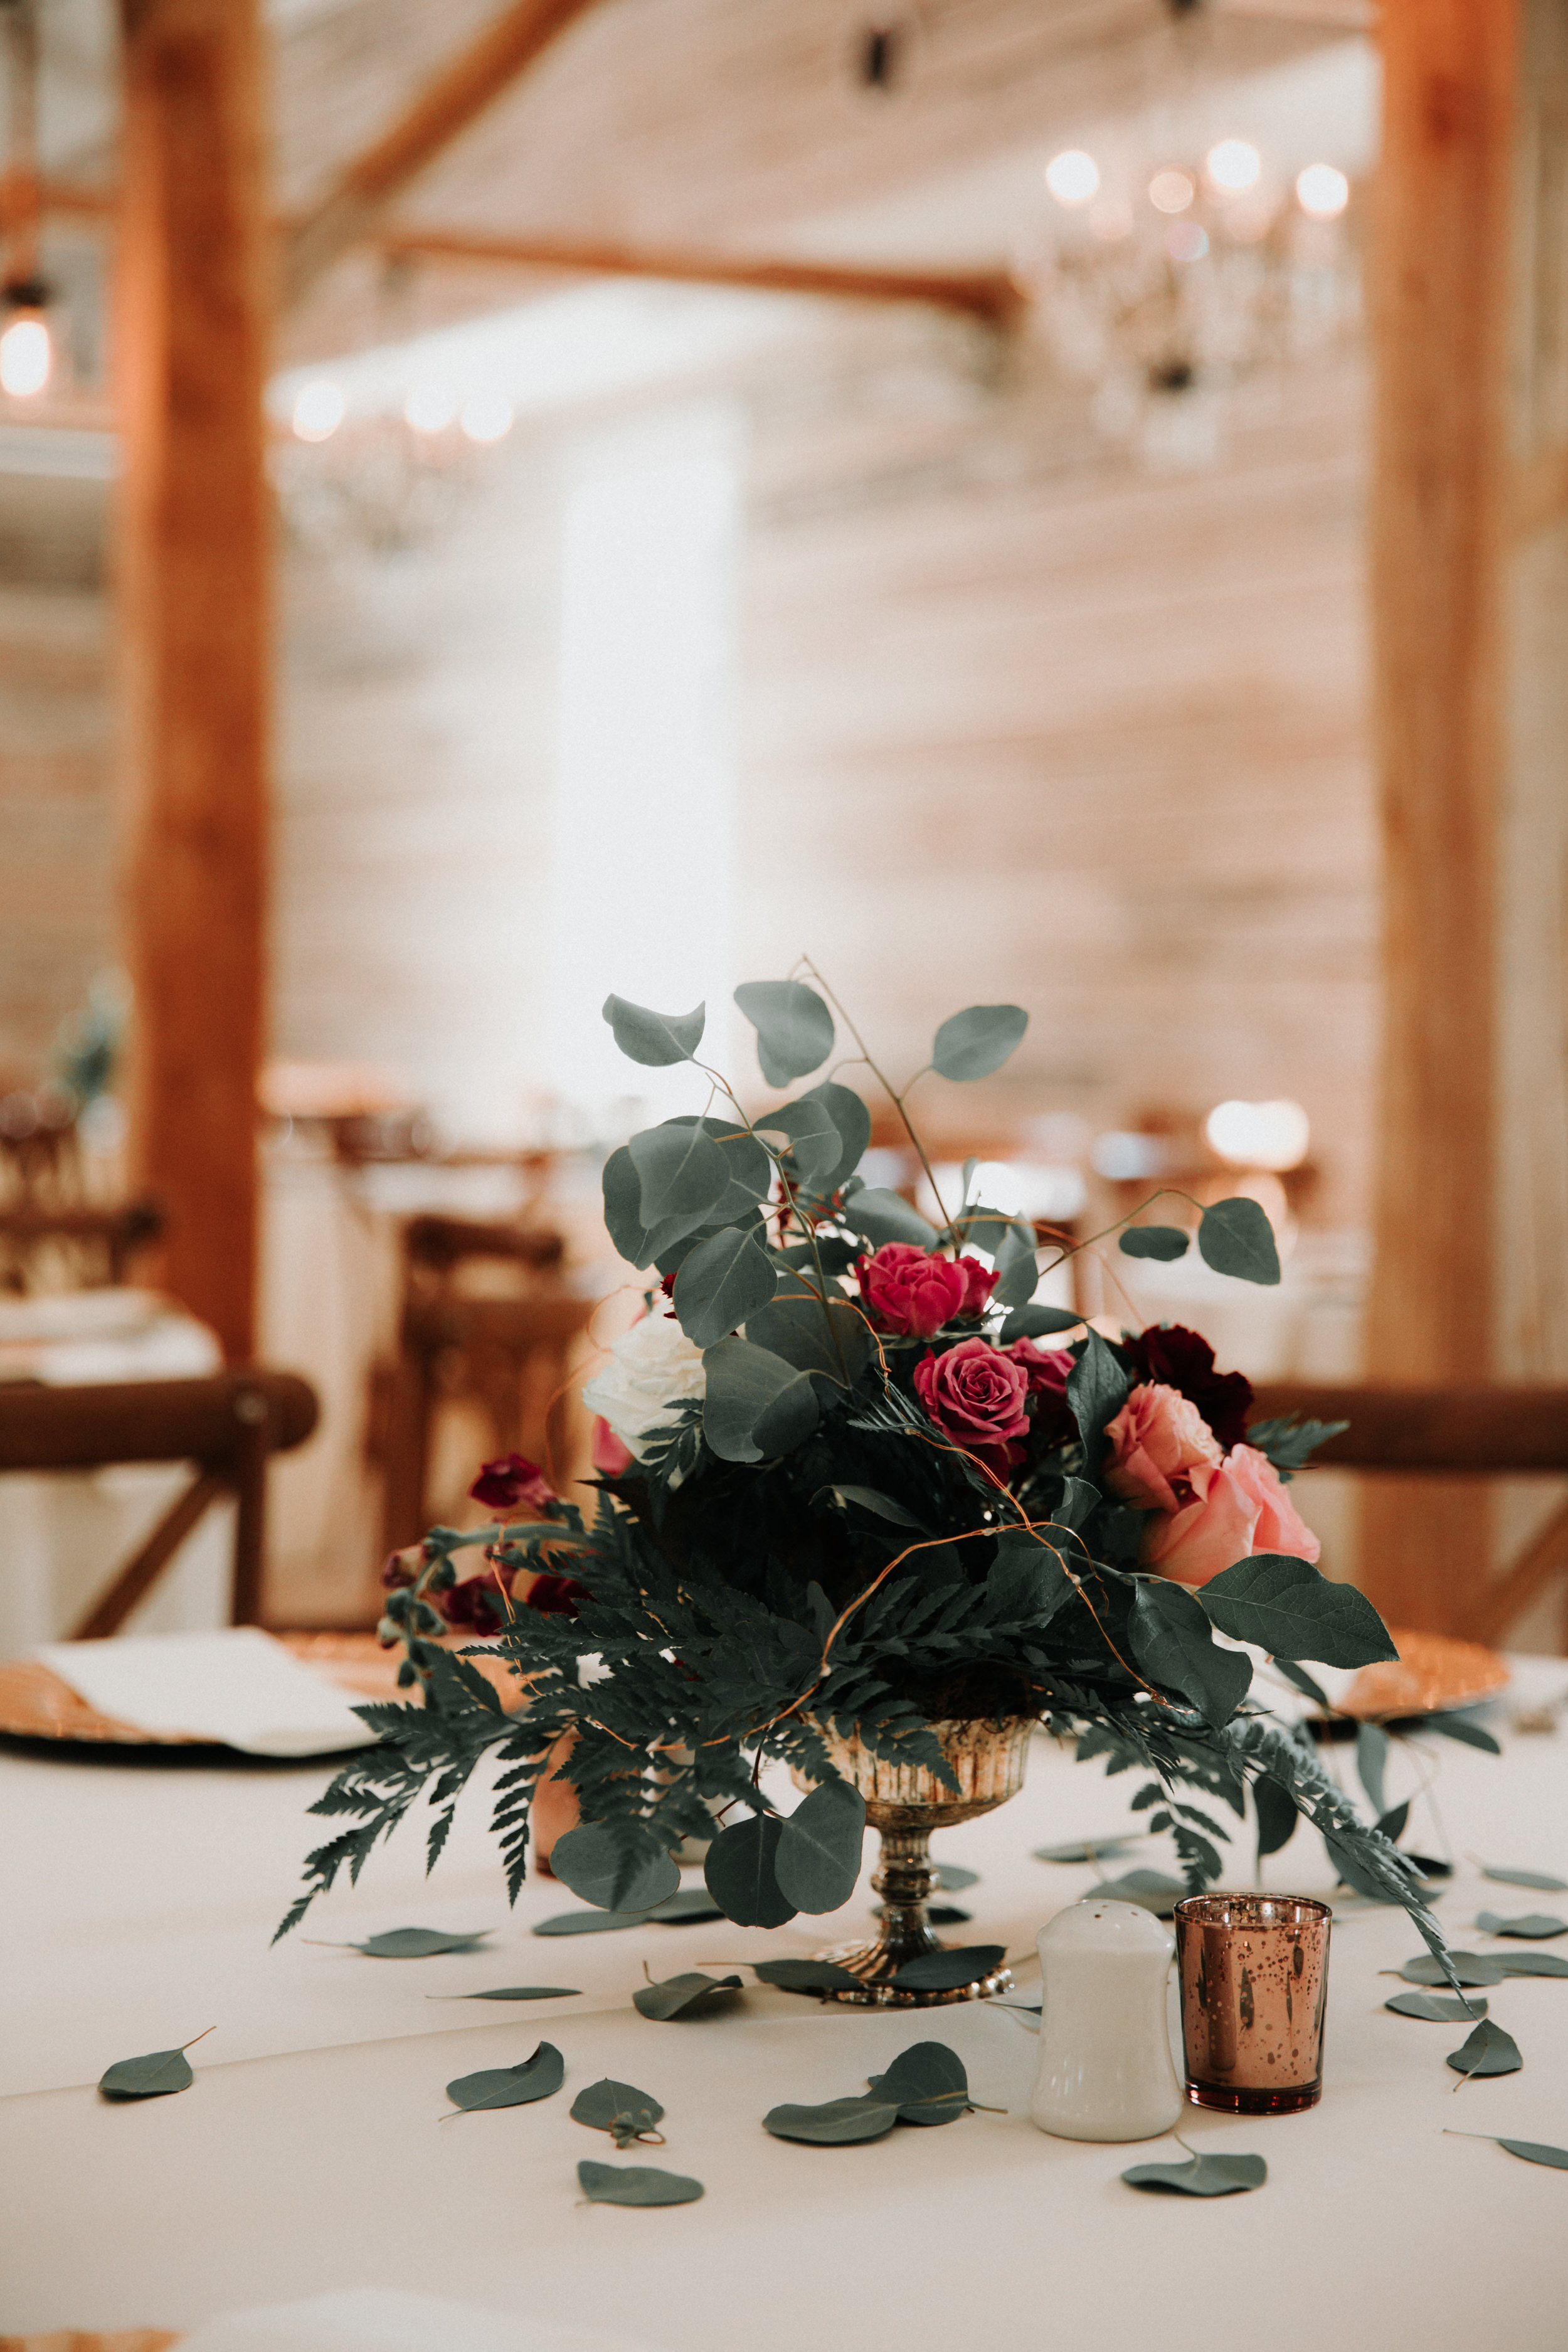 Simple Floral Wedding Centerpieces - Athens, Tennesee Barn Wedding -- The Overwhelmed Bride Wedding Blog